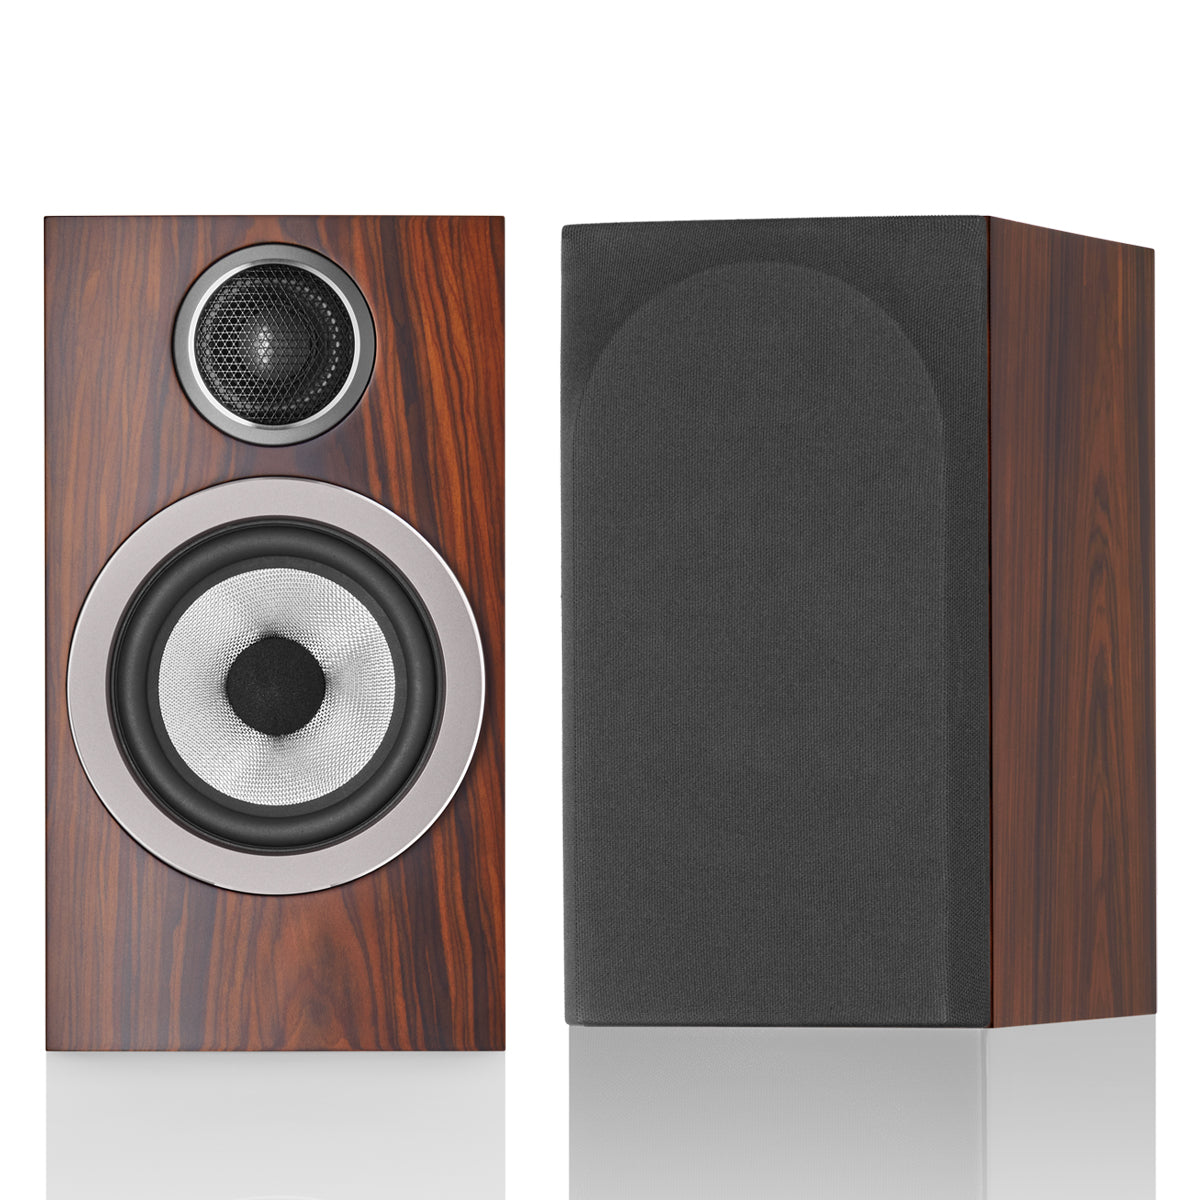 Bowers & Wilkins 707 S3 2-Way Stand Mount Speakers - Mocha - The Audio Experts